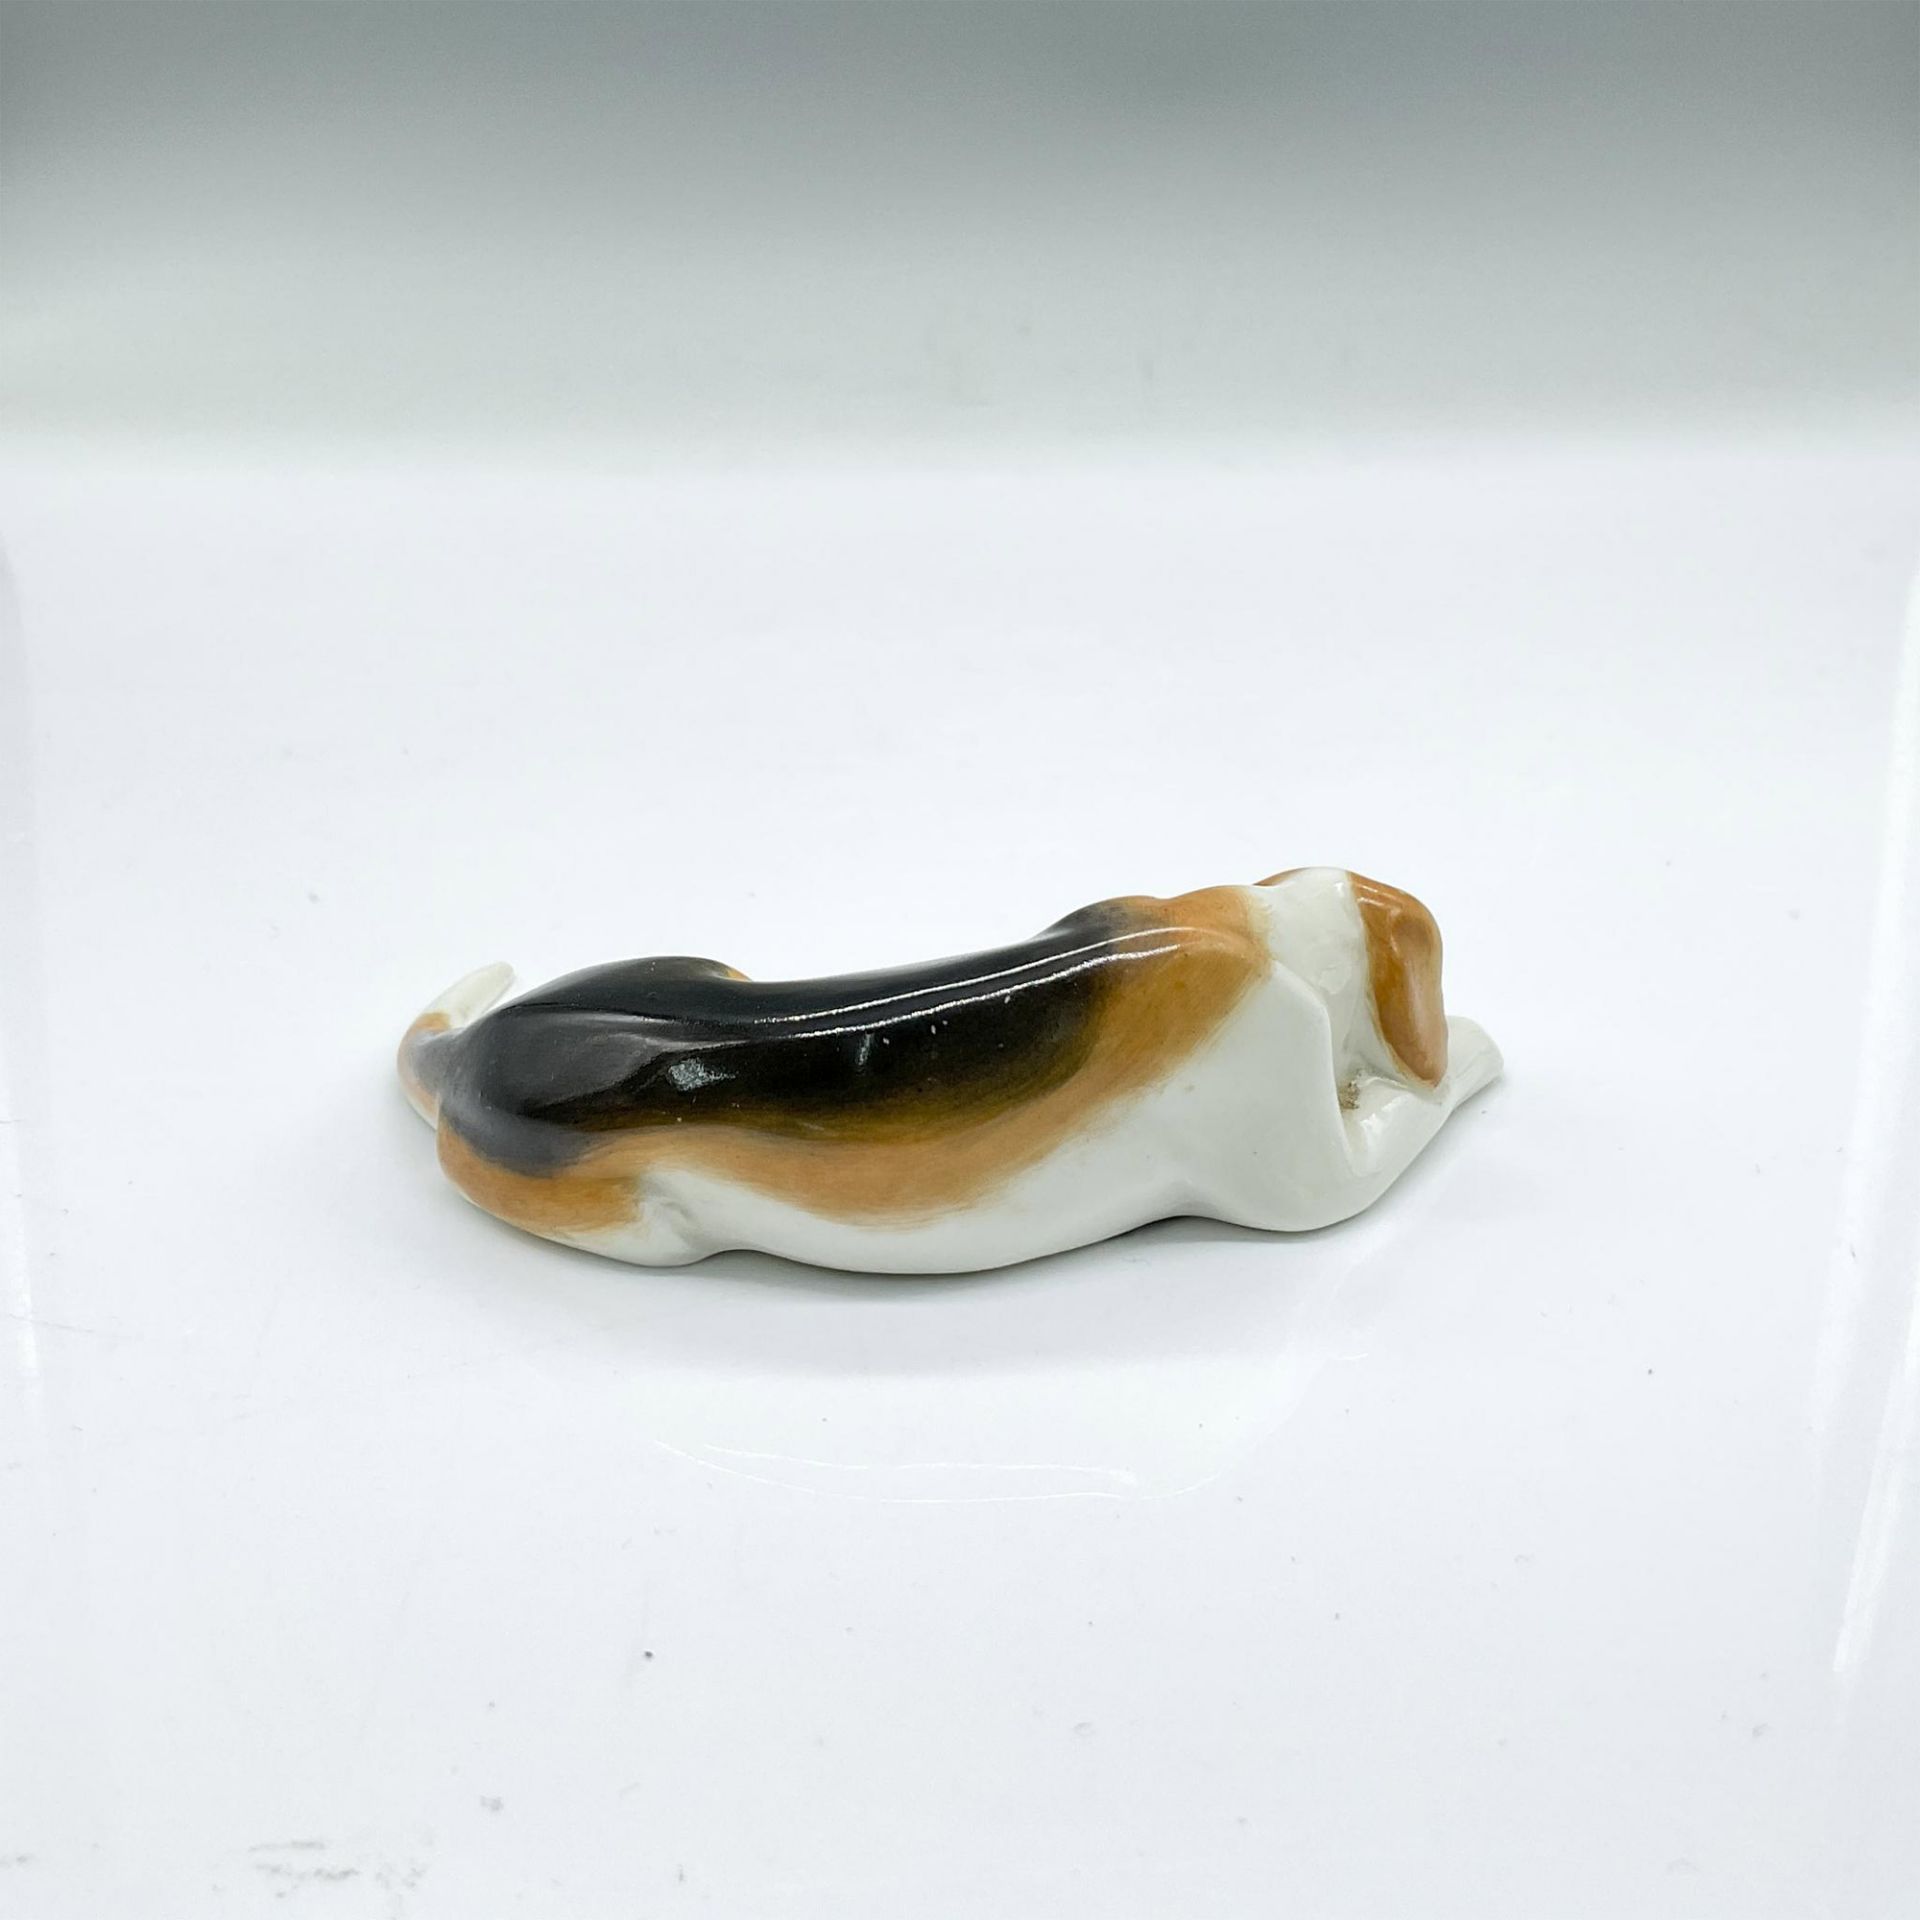 Royal Worcester Figurine, Laying Beagle - Image 2 of 3